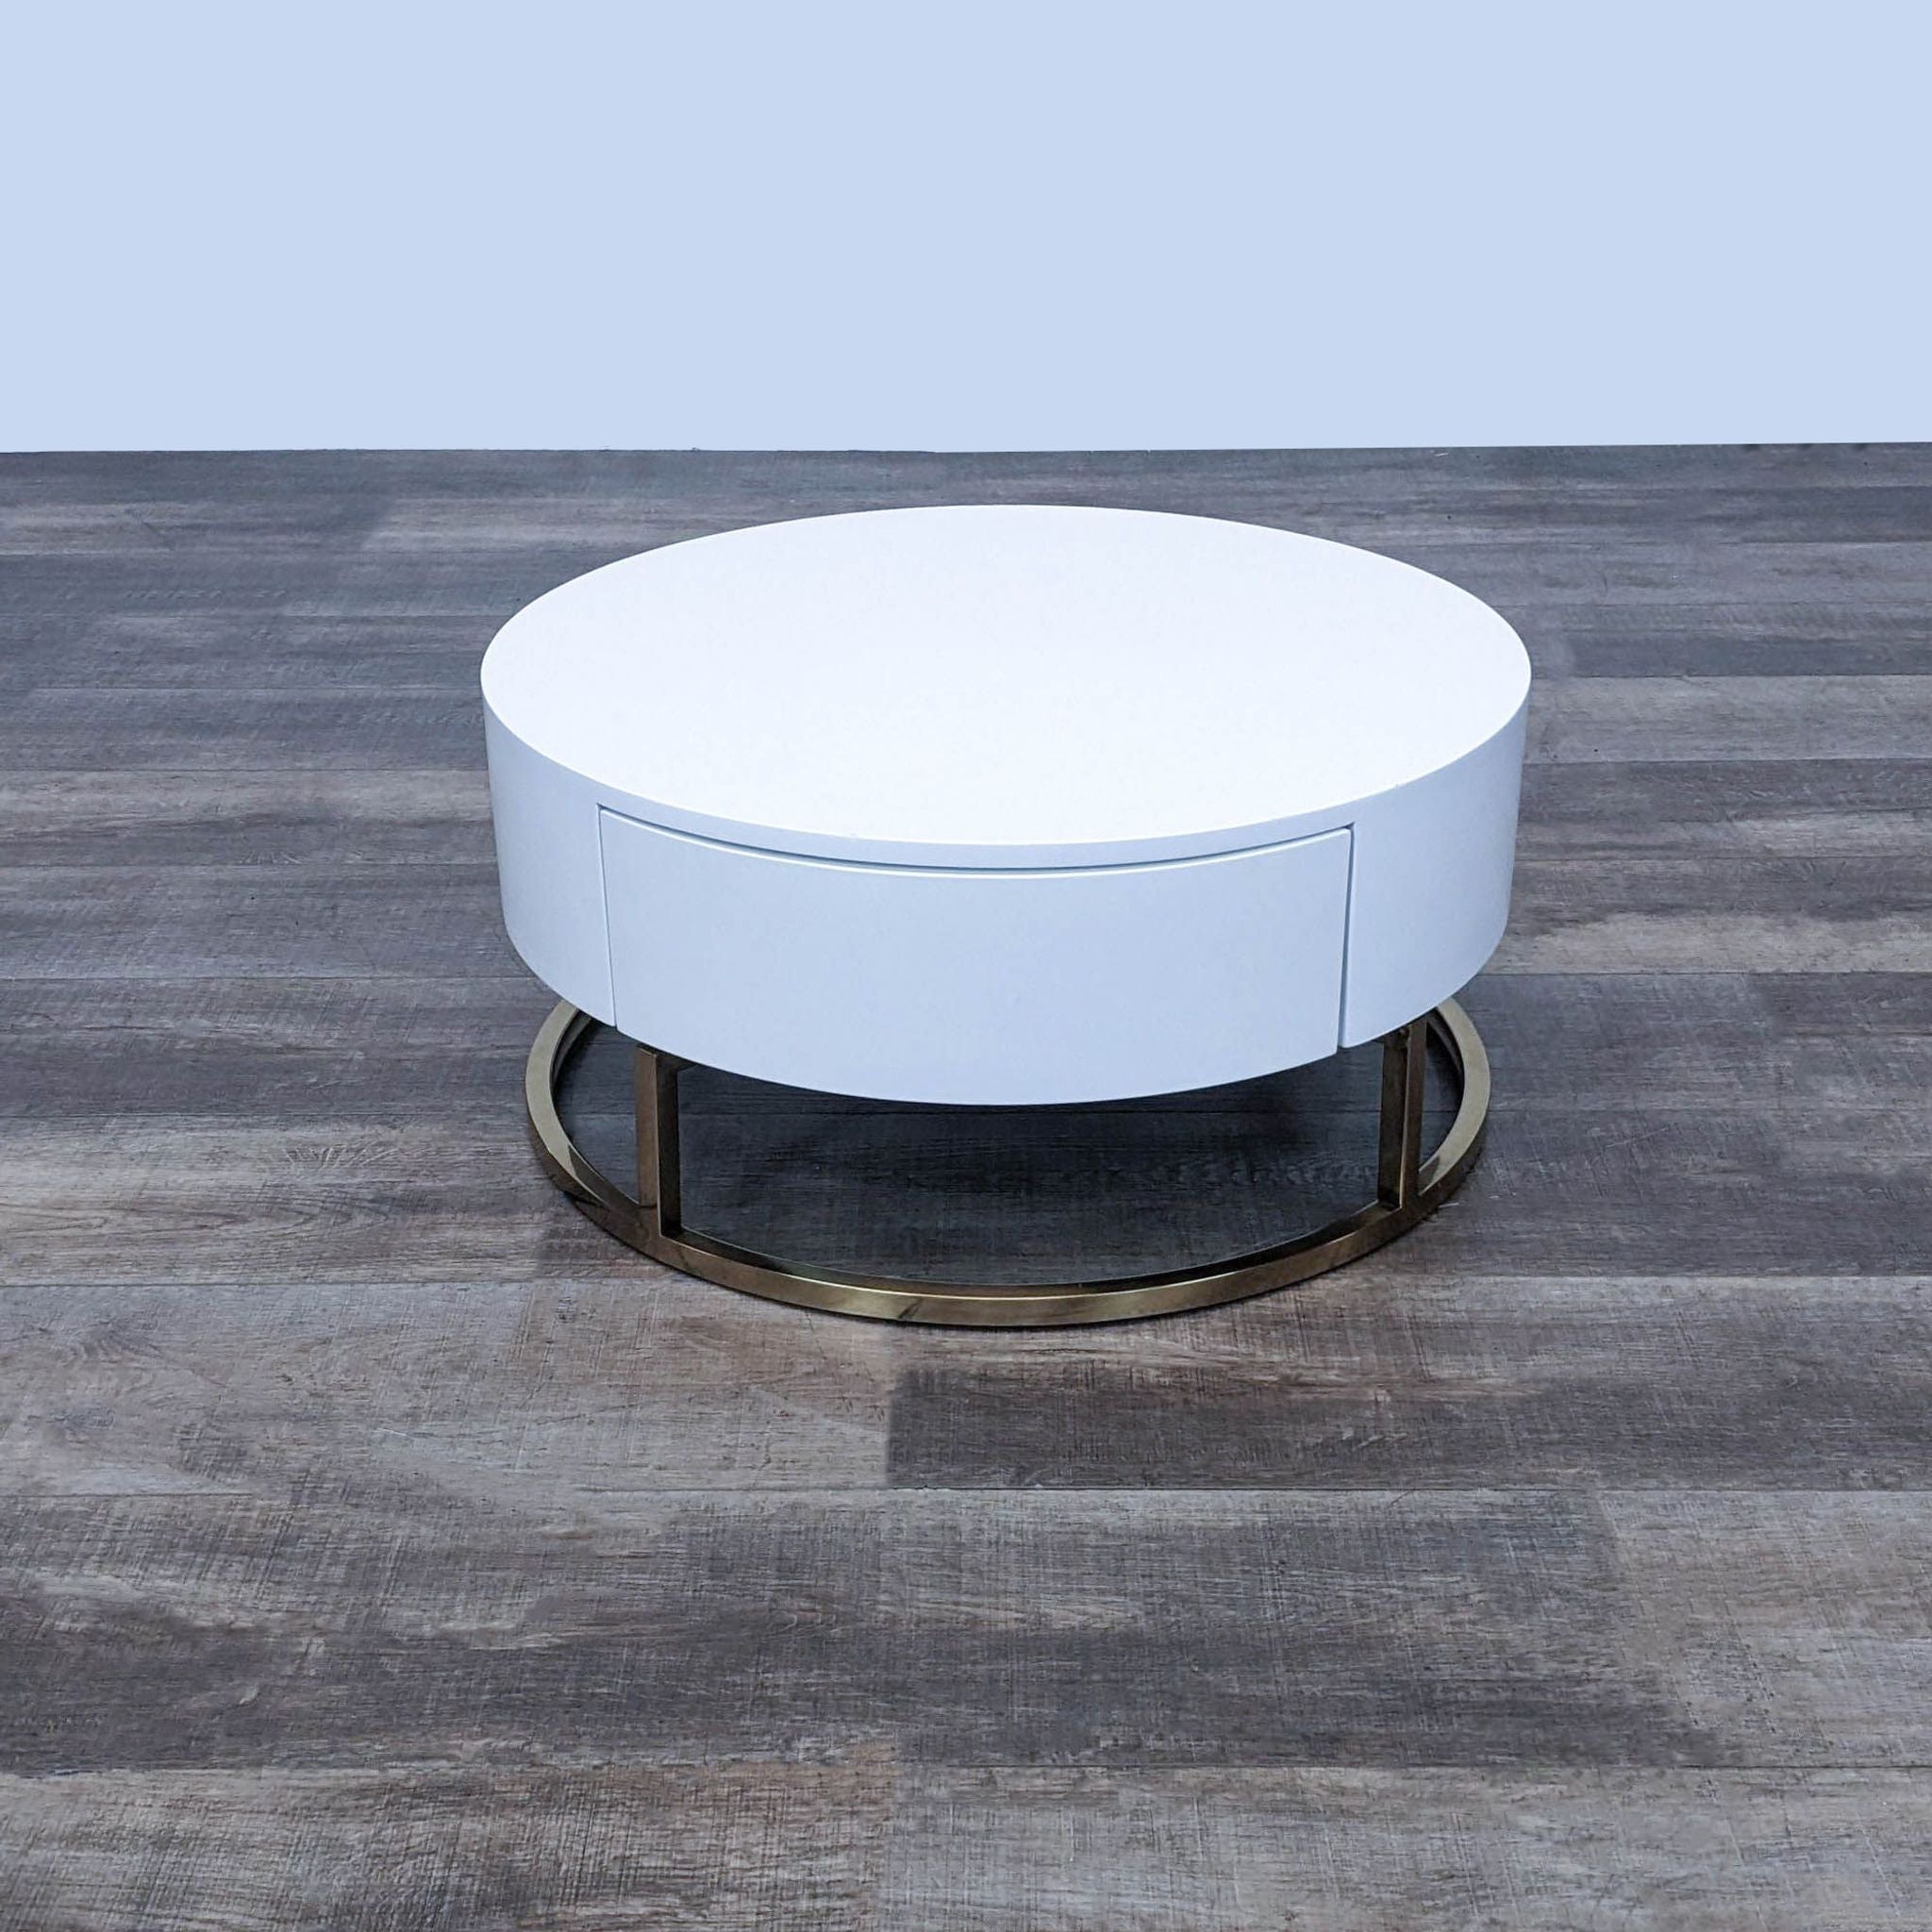 Alt text 1: Round Reperch coffee table with a white top and a metal base, on a wooden floor.